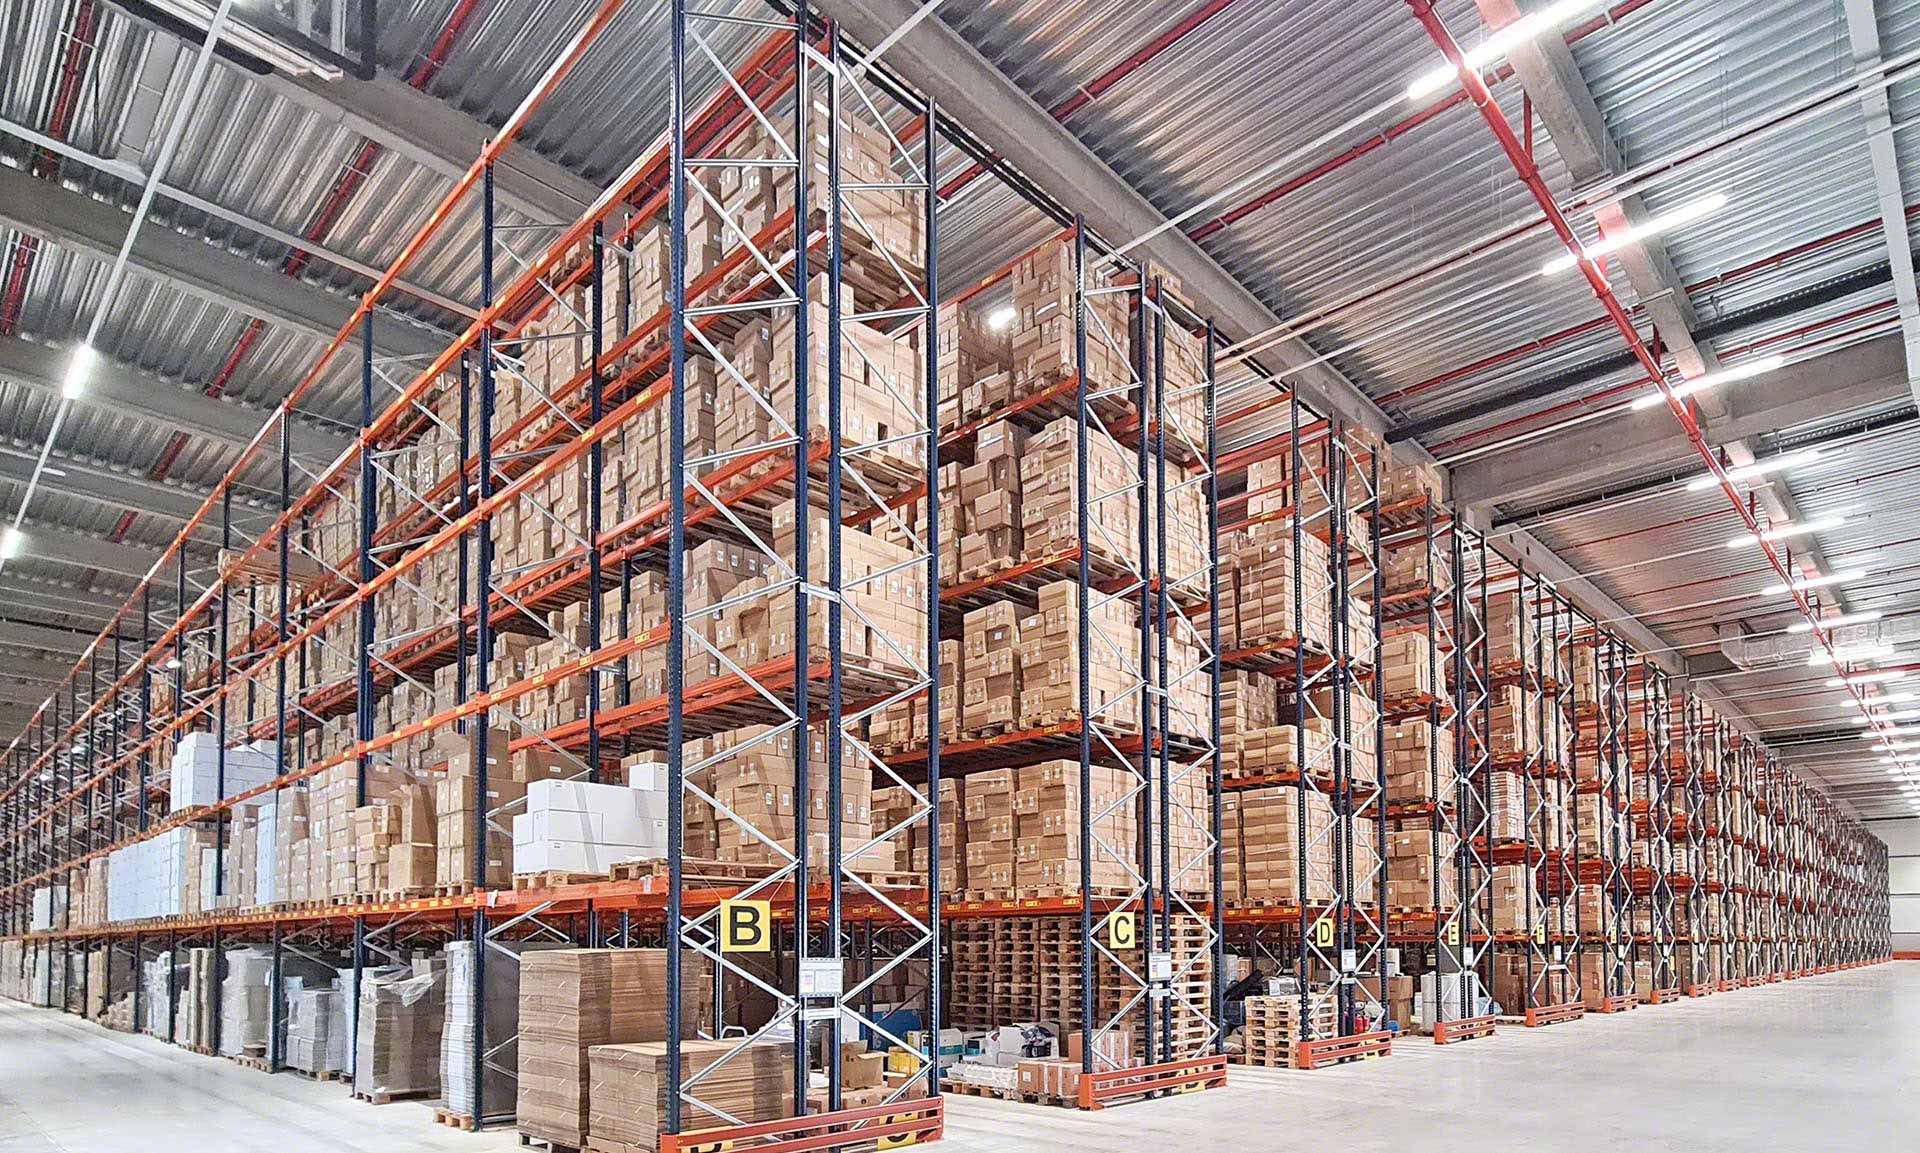 The racking provides direct access to 26,328 pallets